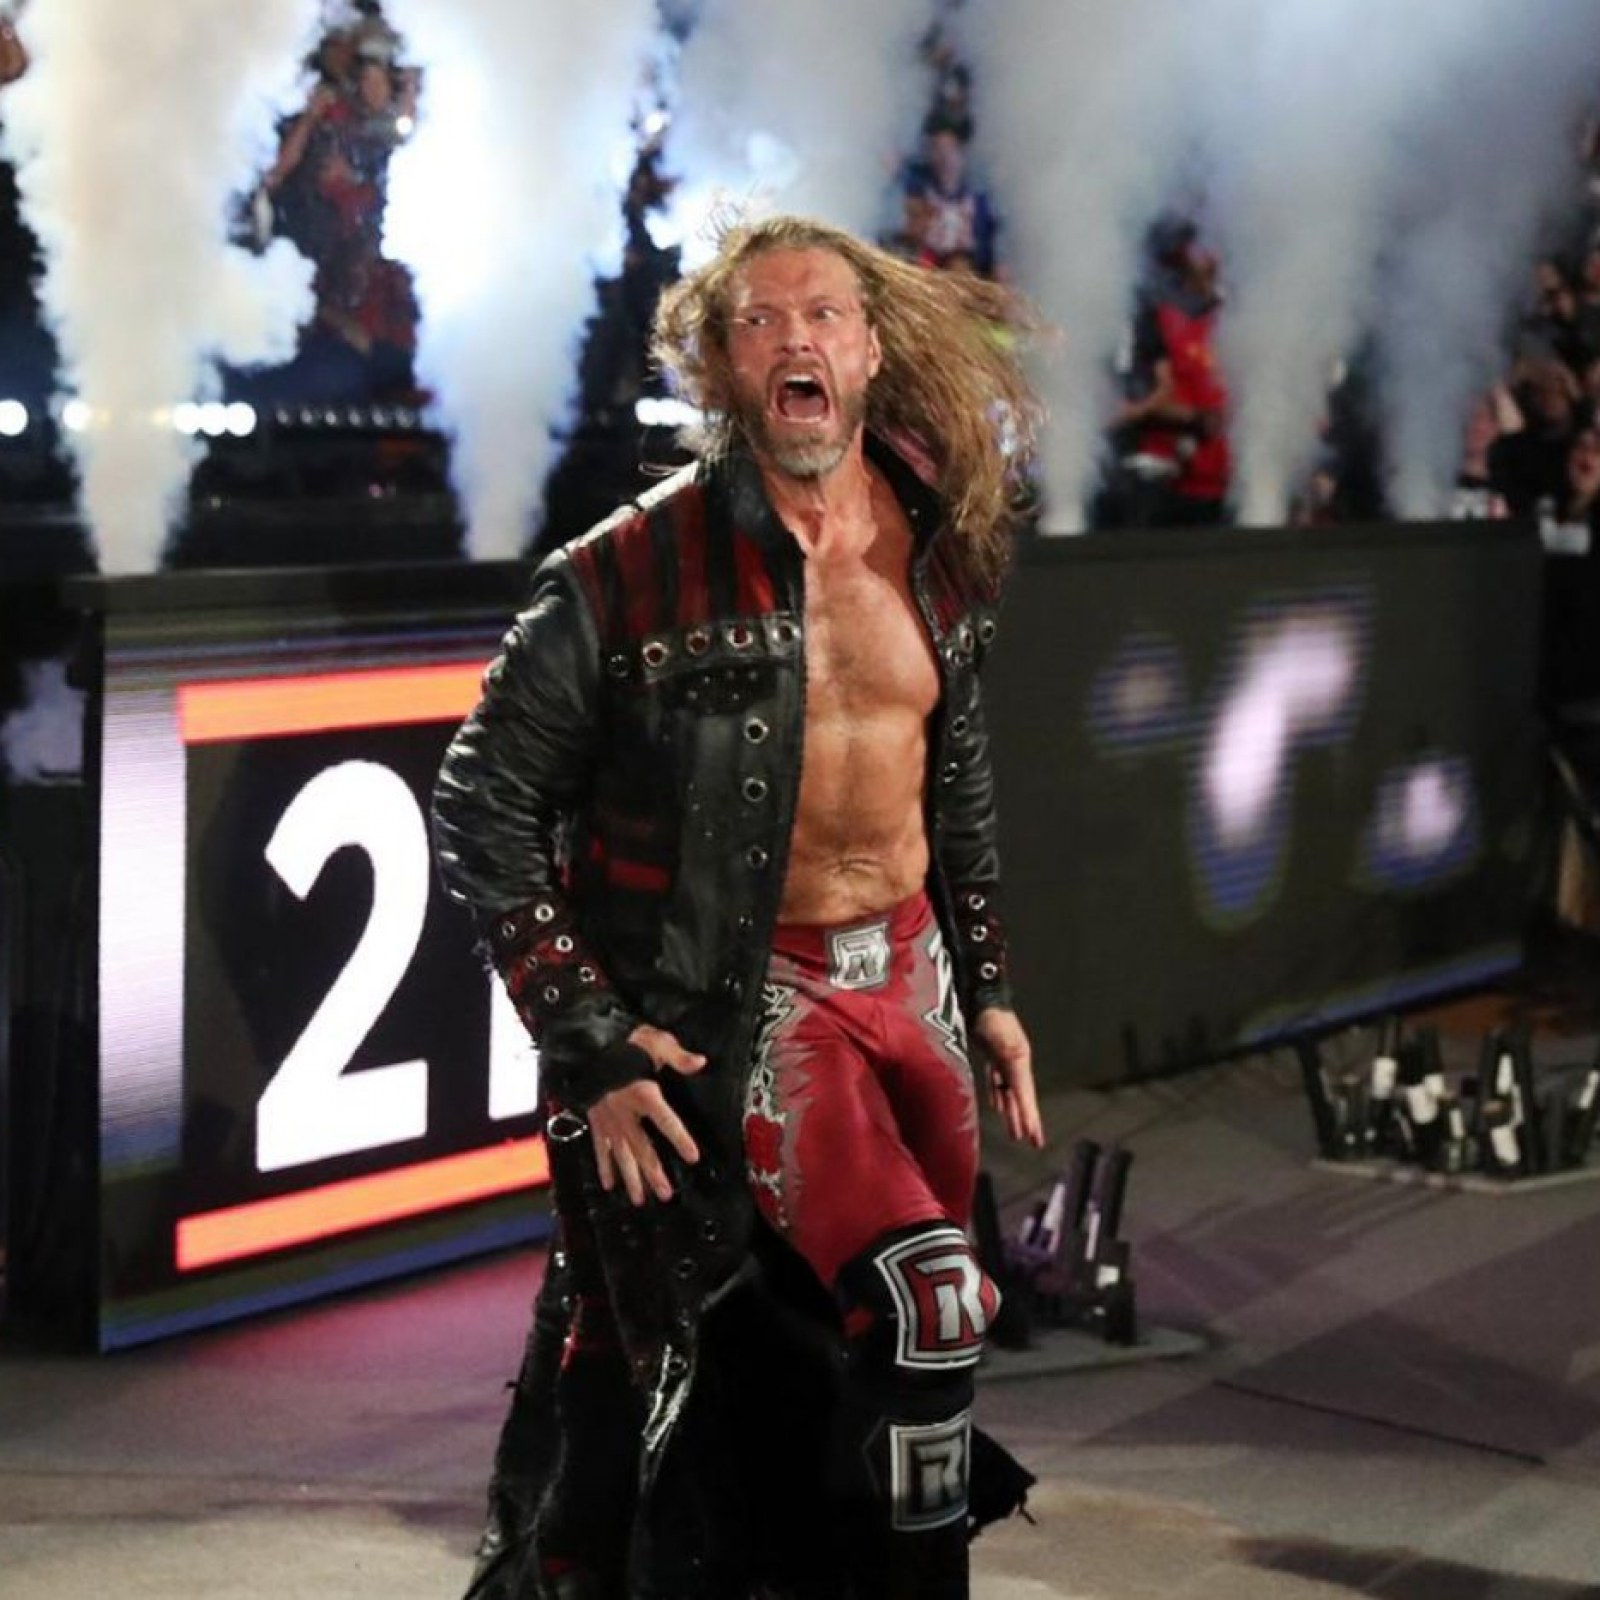 Edge Makes Surprise Return at the WWE 'Royal Rumble' Event